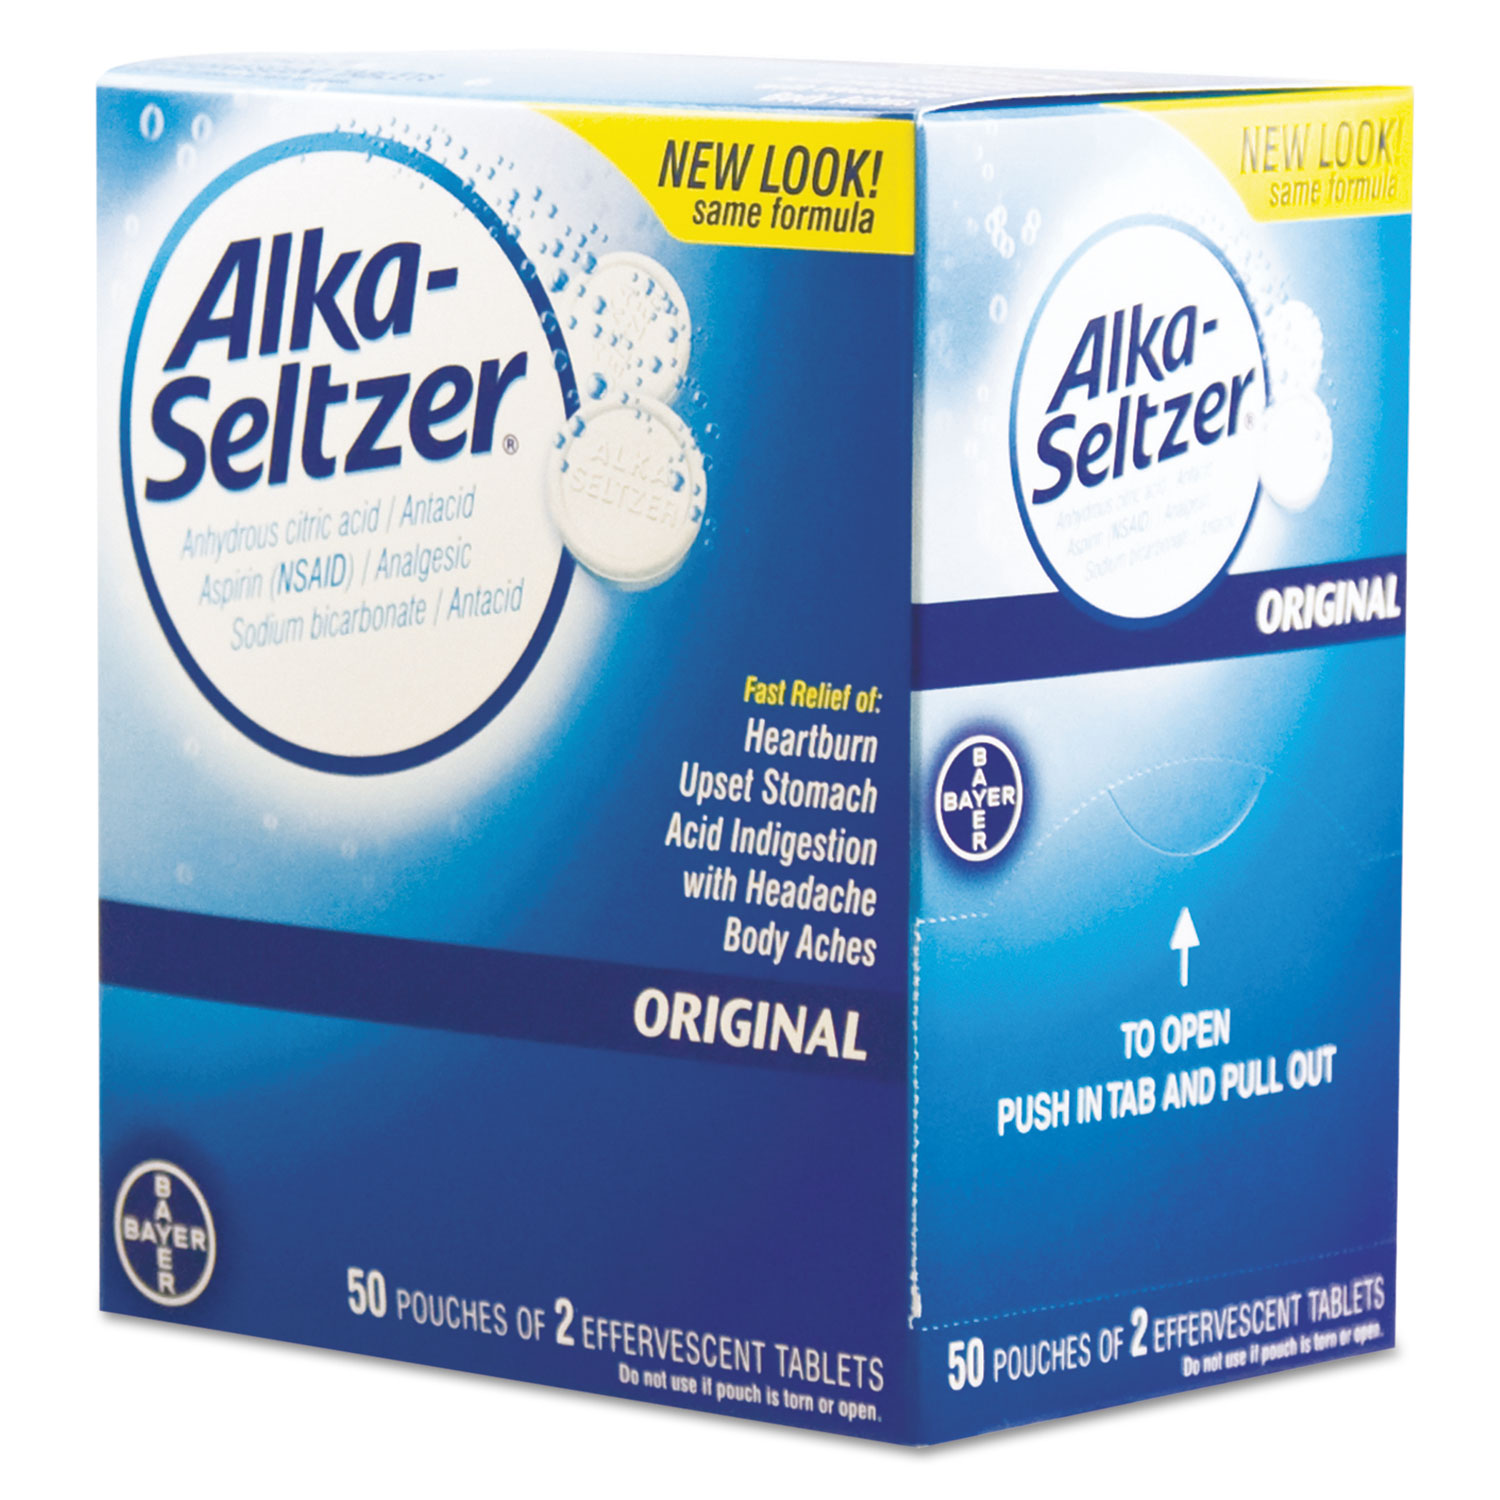  Alka-Seltzer 50004 Antacid and Pain Relief Medicine, Two-Pack, 50 Packs/Box (PFYBXAS50) 